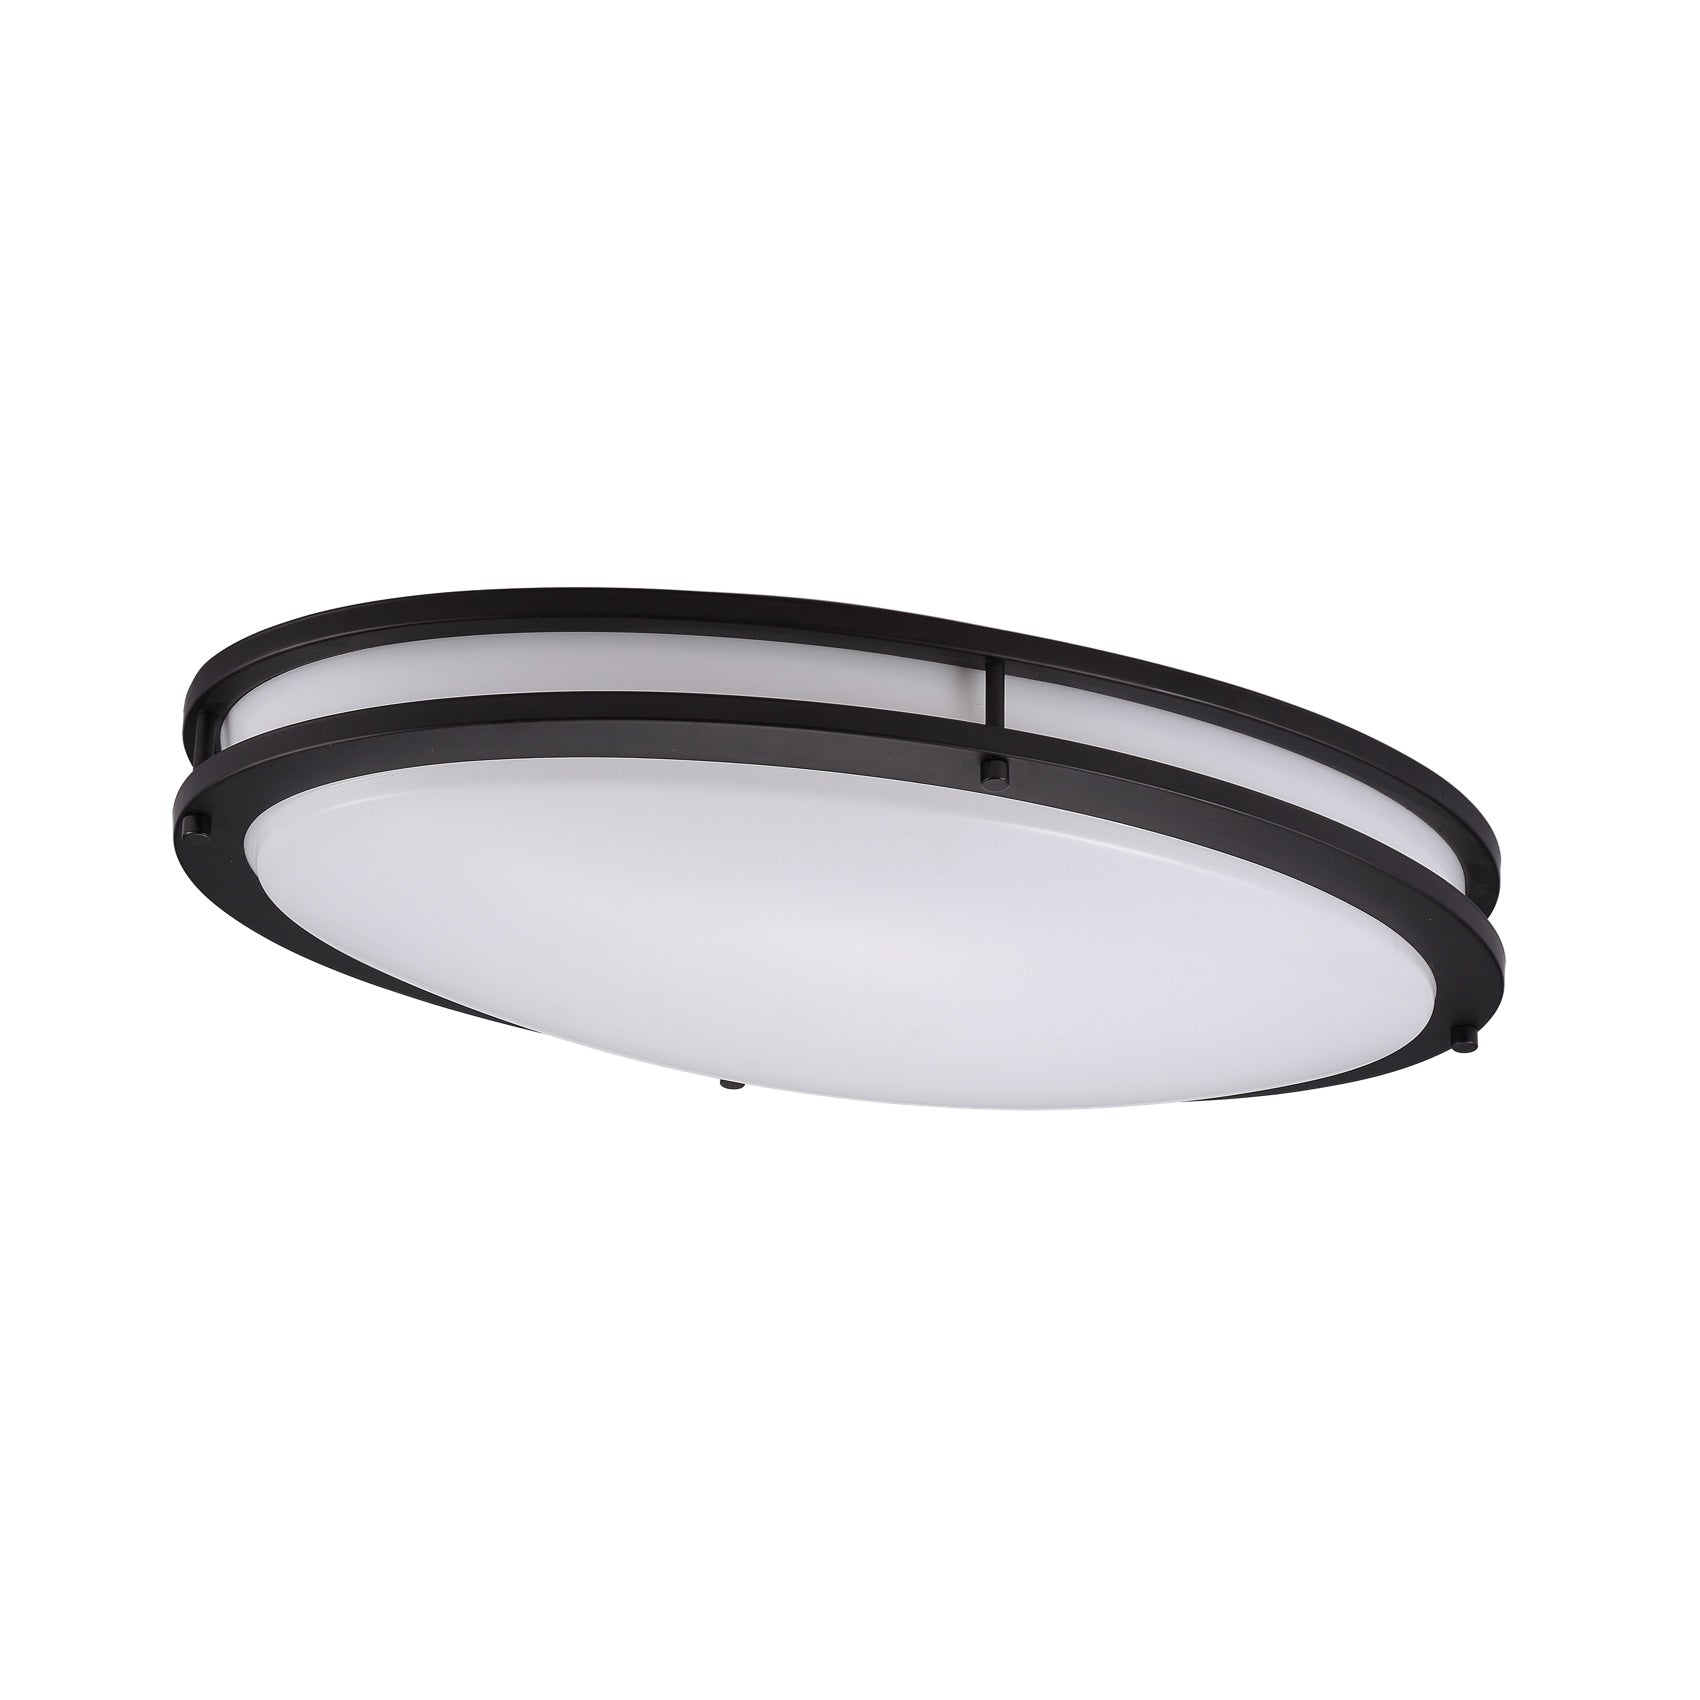 Cloudy Bay Lighting Professional Led Lighting Fixtures Supplier